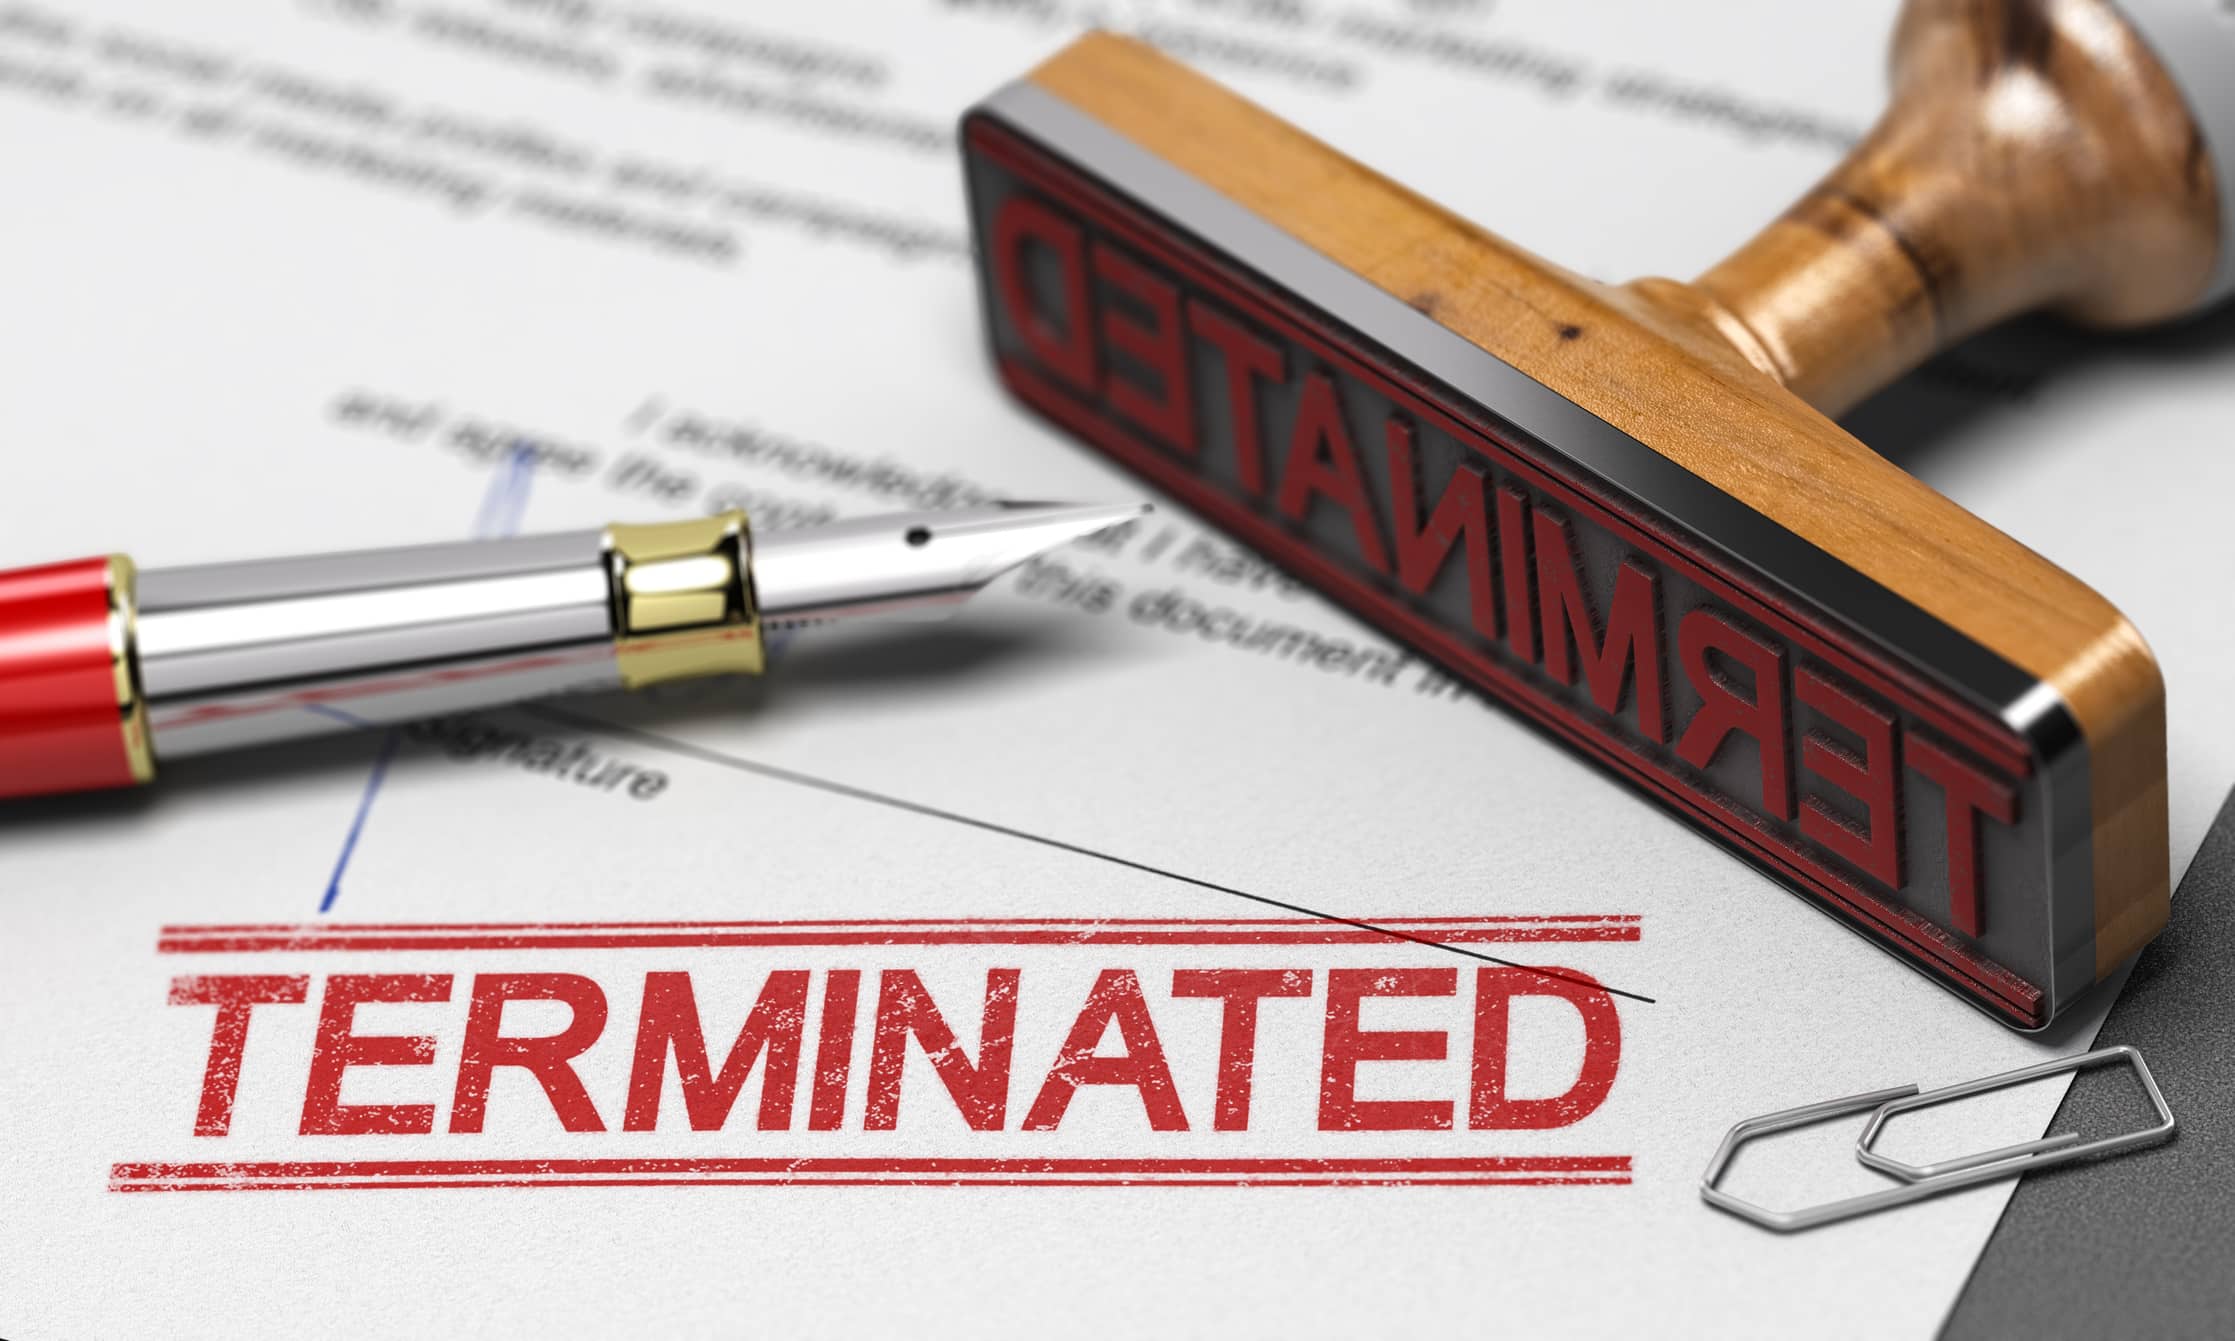 Termination of contract agreement Word Terminated printed on a document